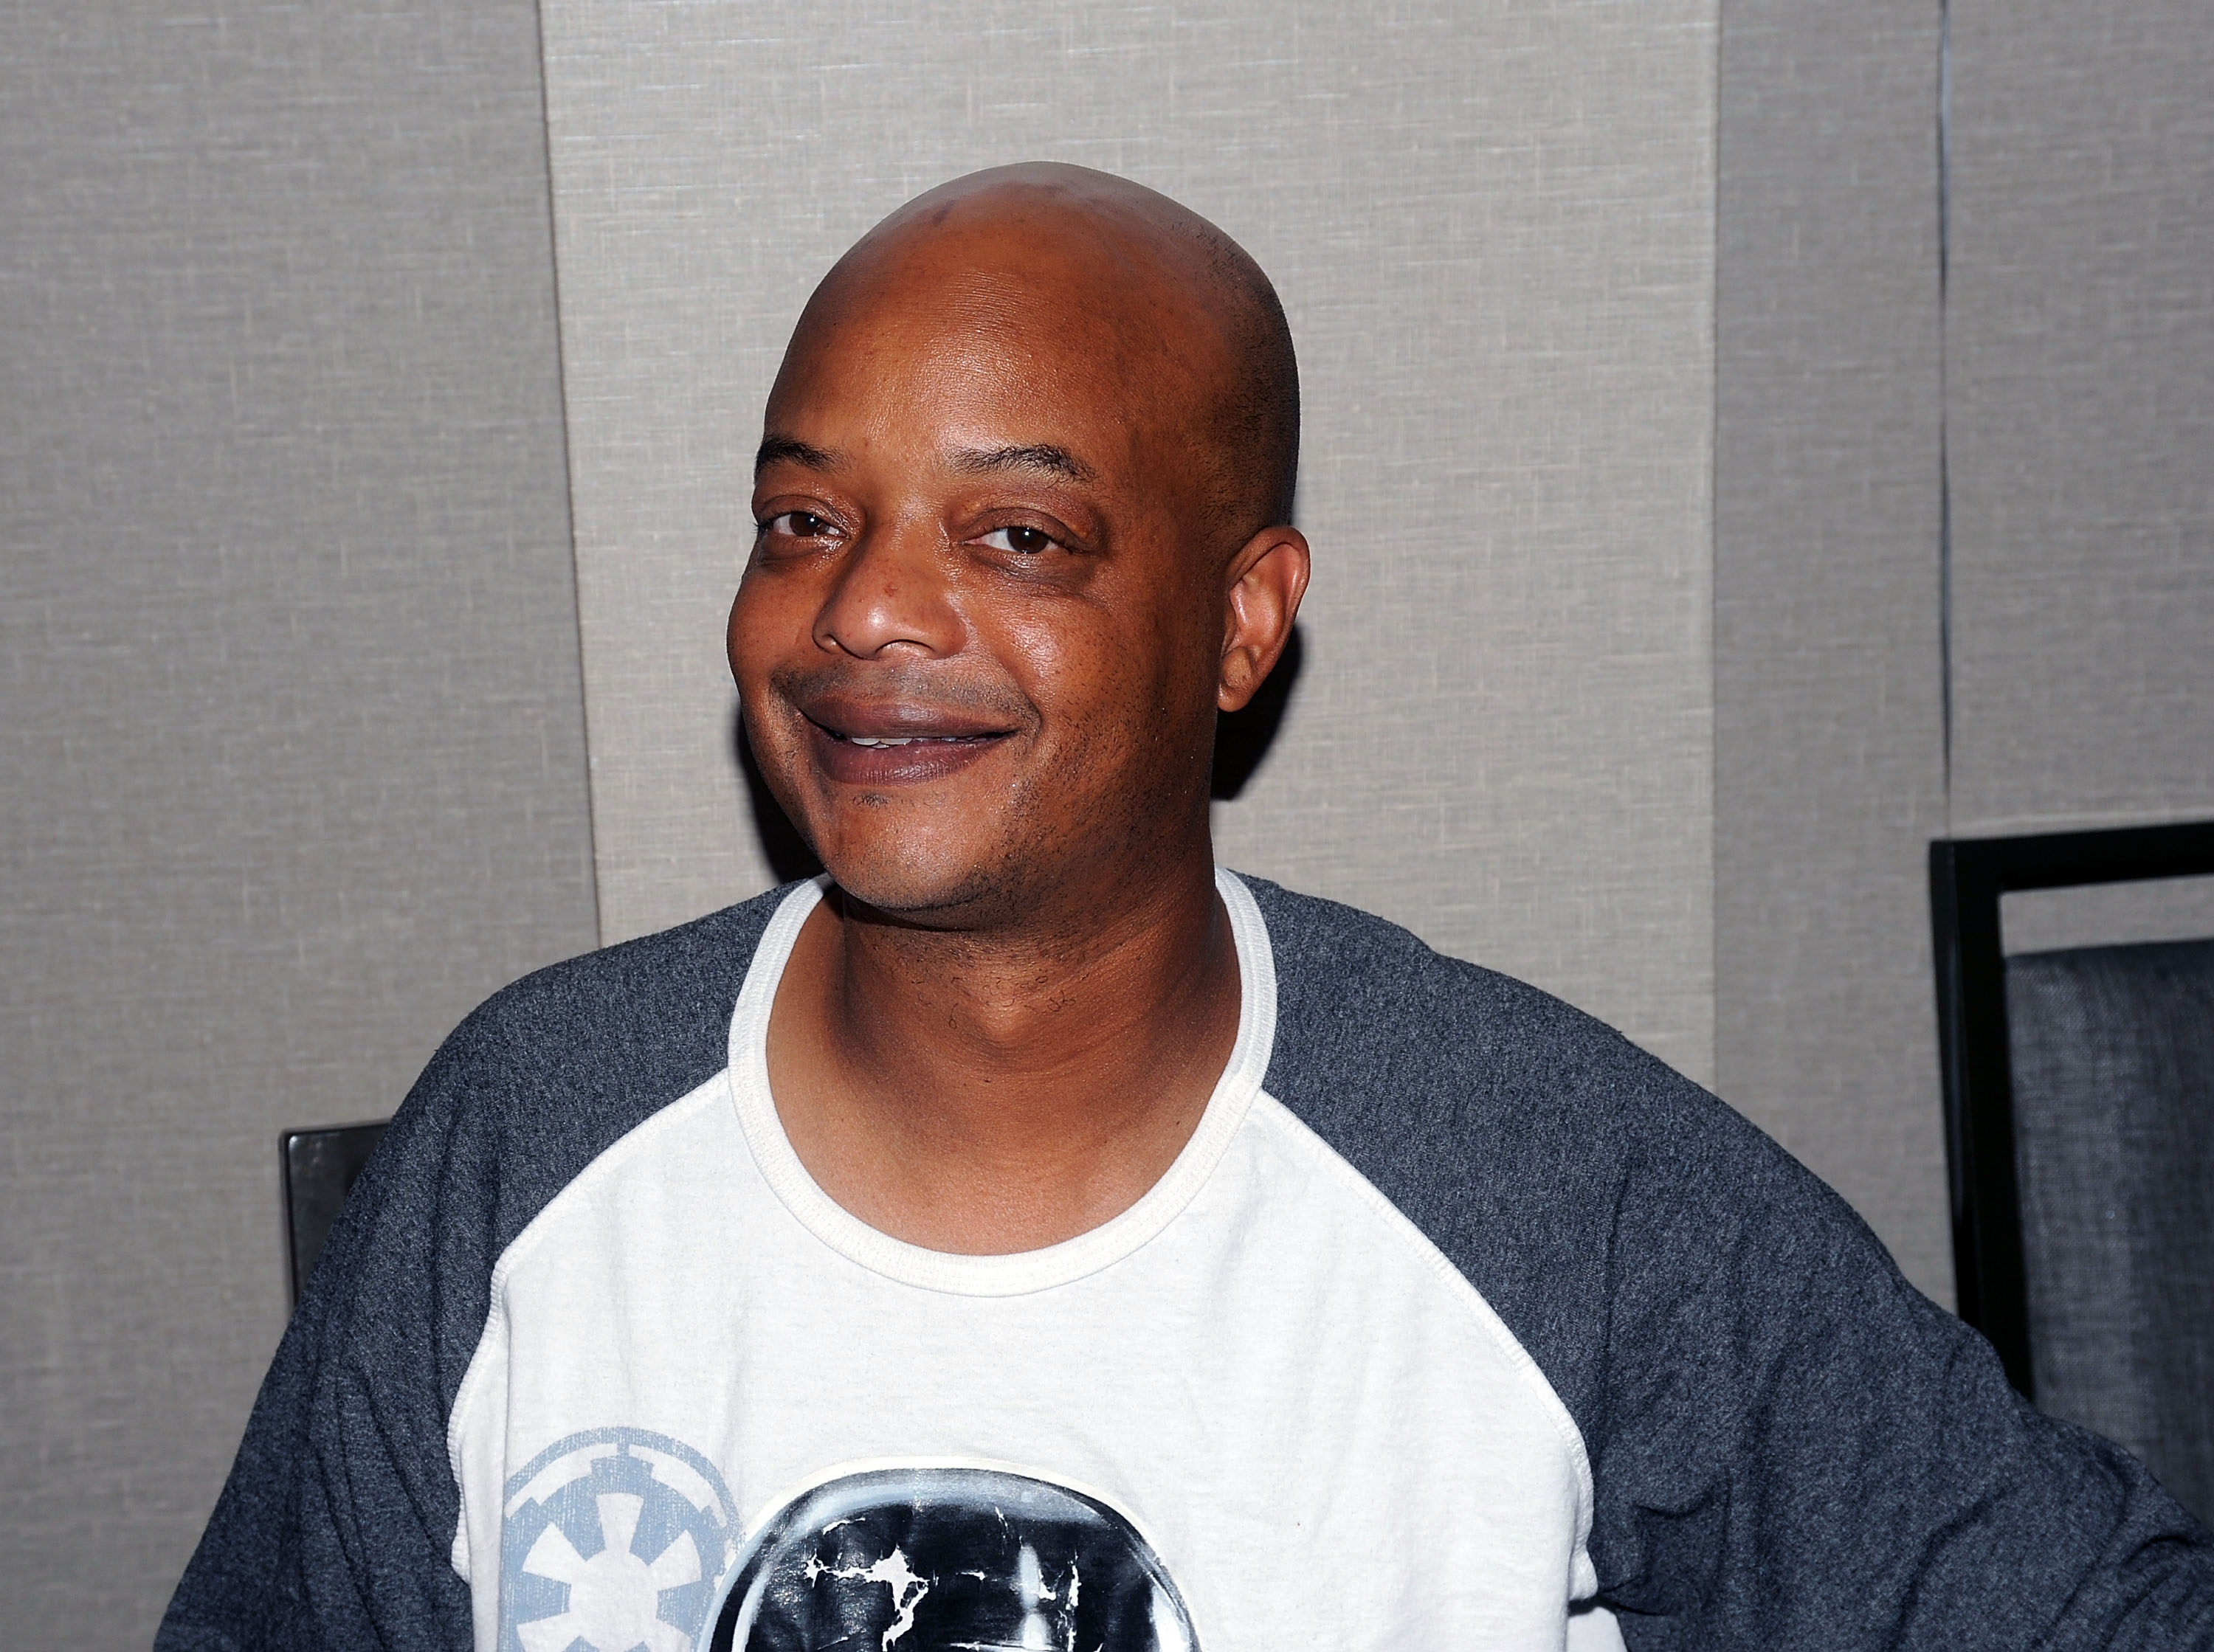 Todd Bridges at the Chiller Theater Expo Winter 2017, Parsippany, New Jersey. | Photo: Getty Images